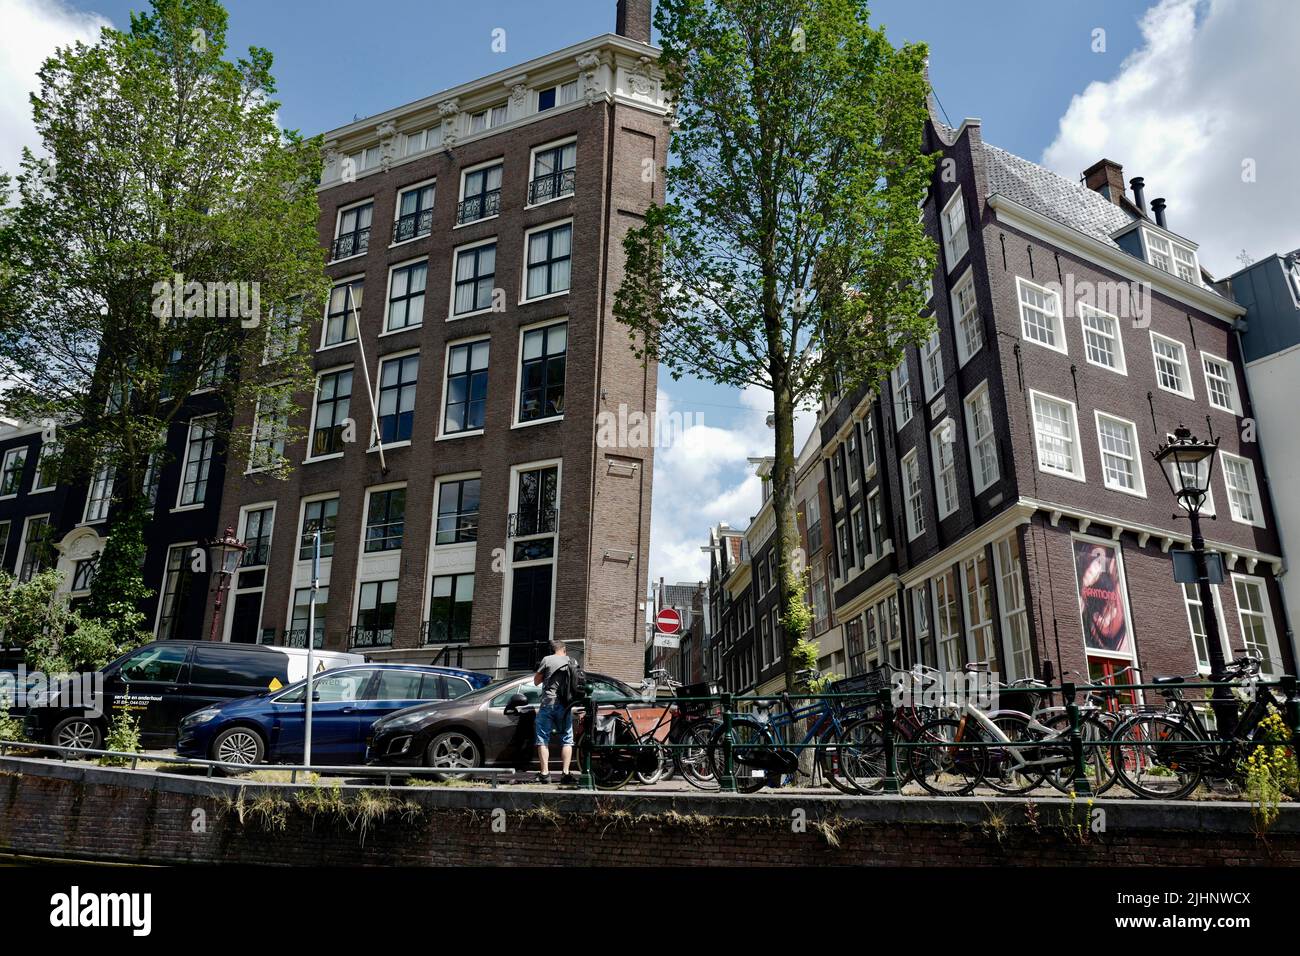 Leaning houses at Prinsengracht in Amsterdam Stock Photo